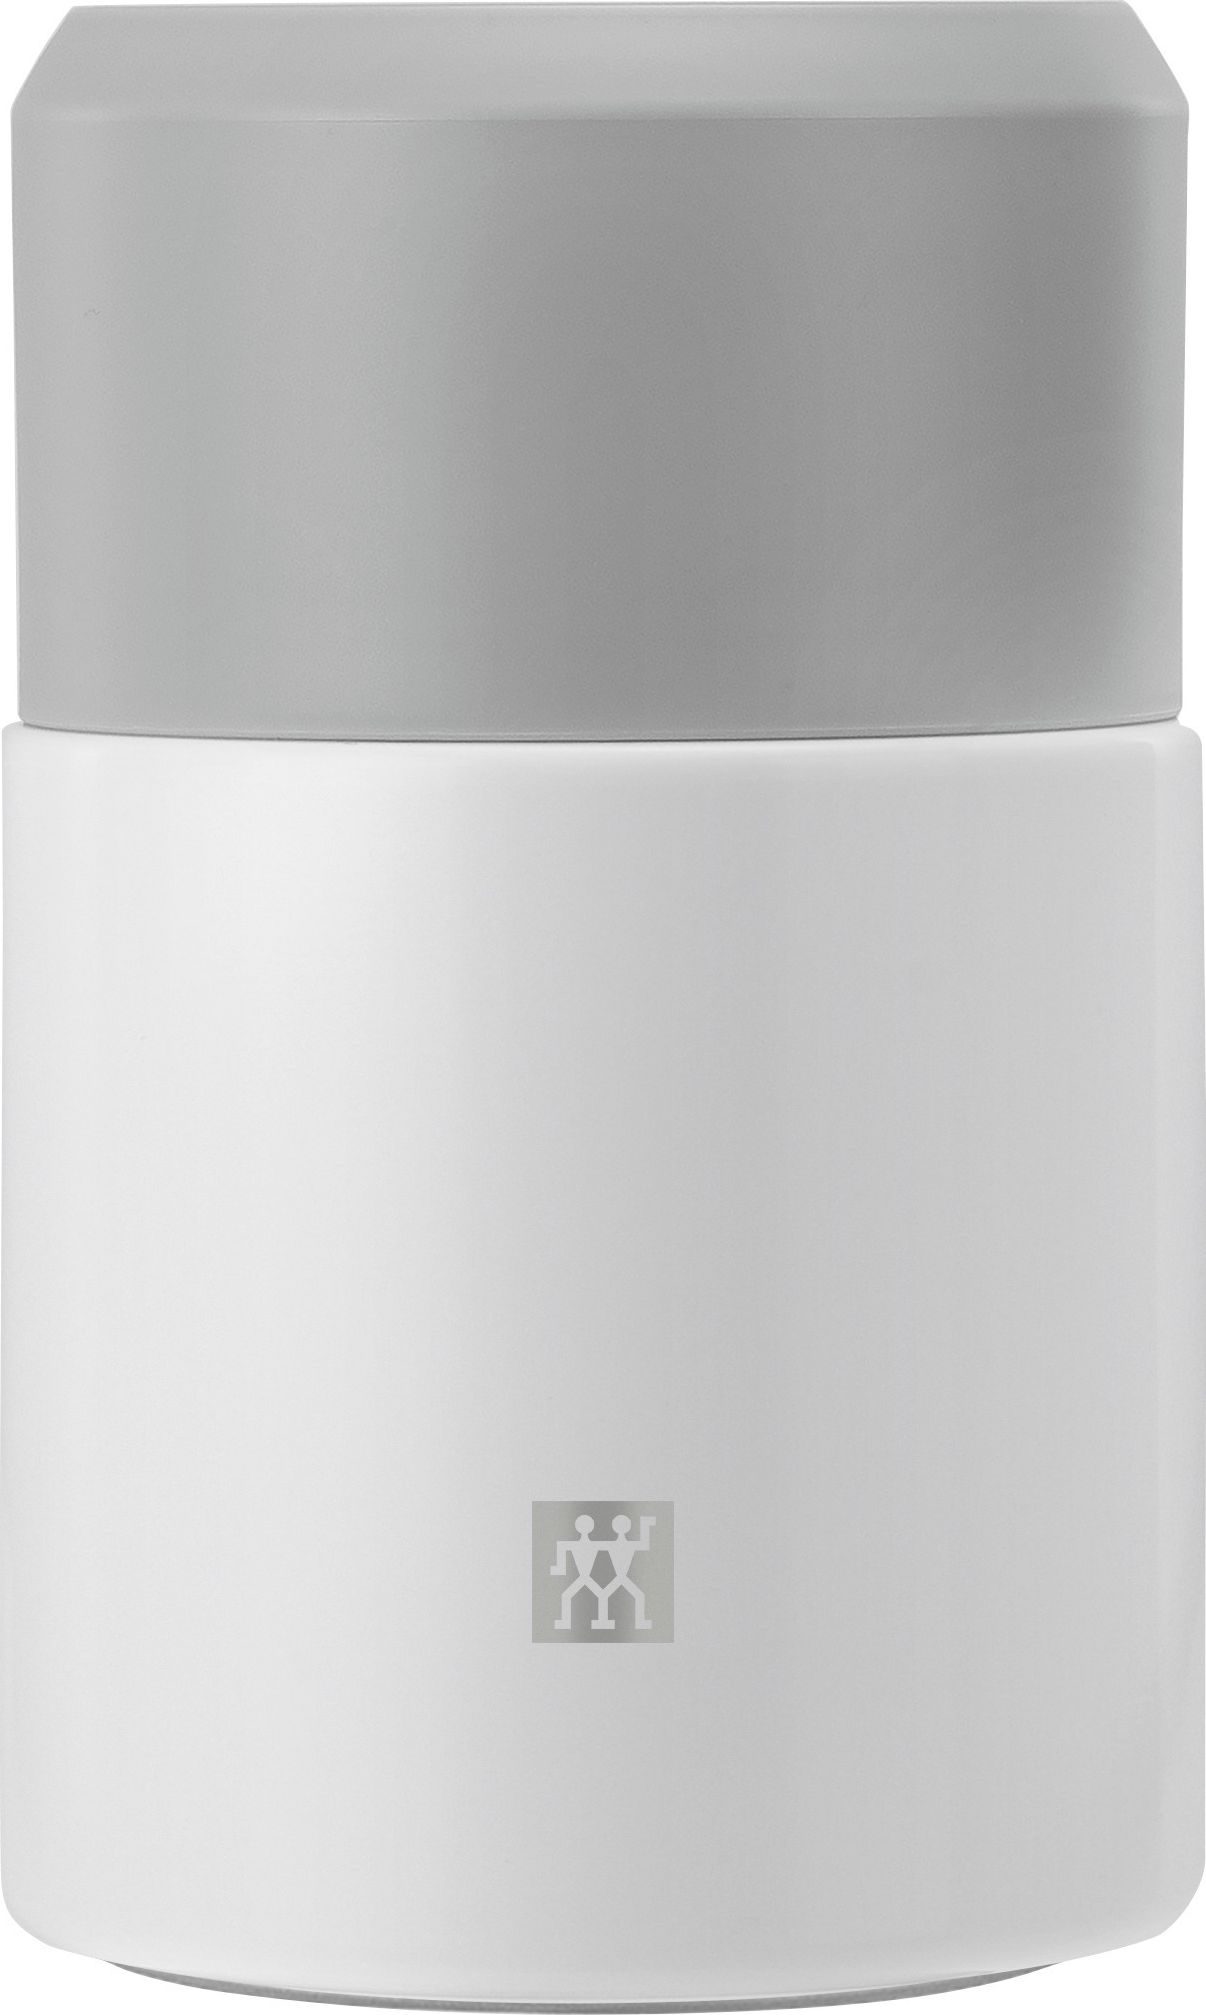 ZWILLING Thermo food container 39500-509-0 white 700ml termoss